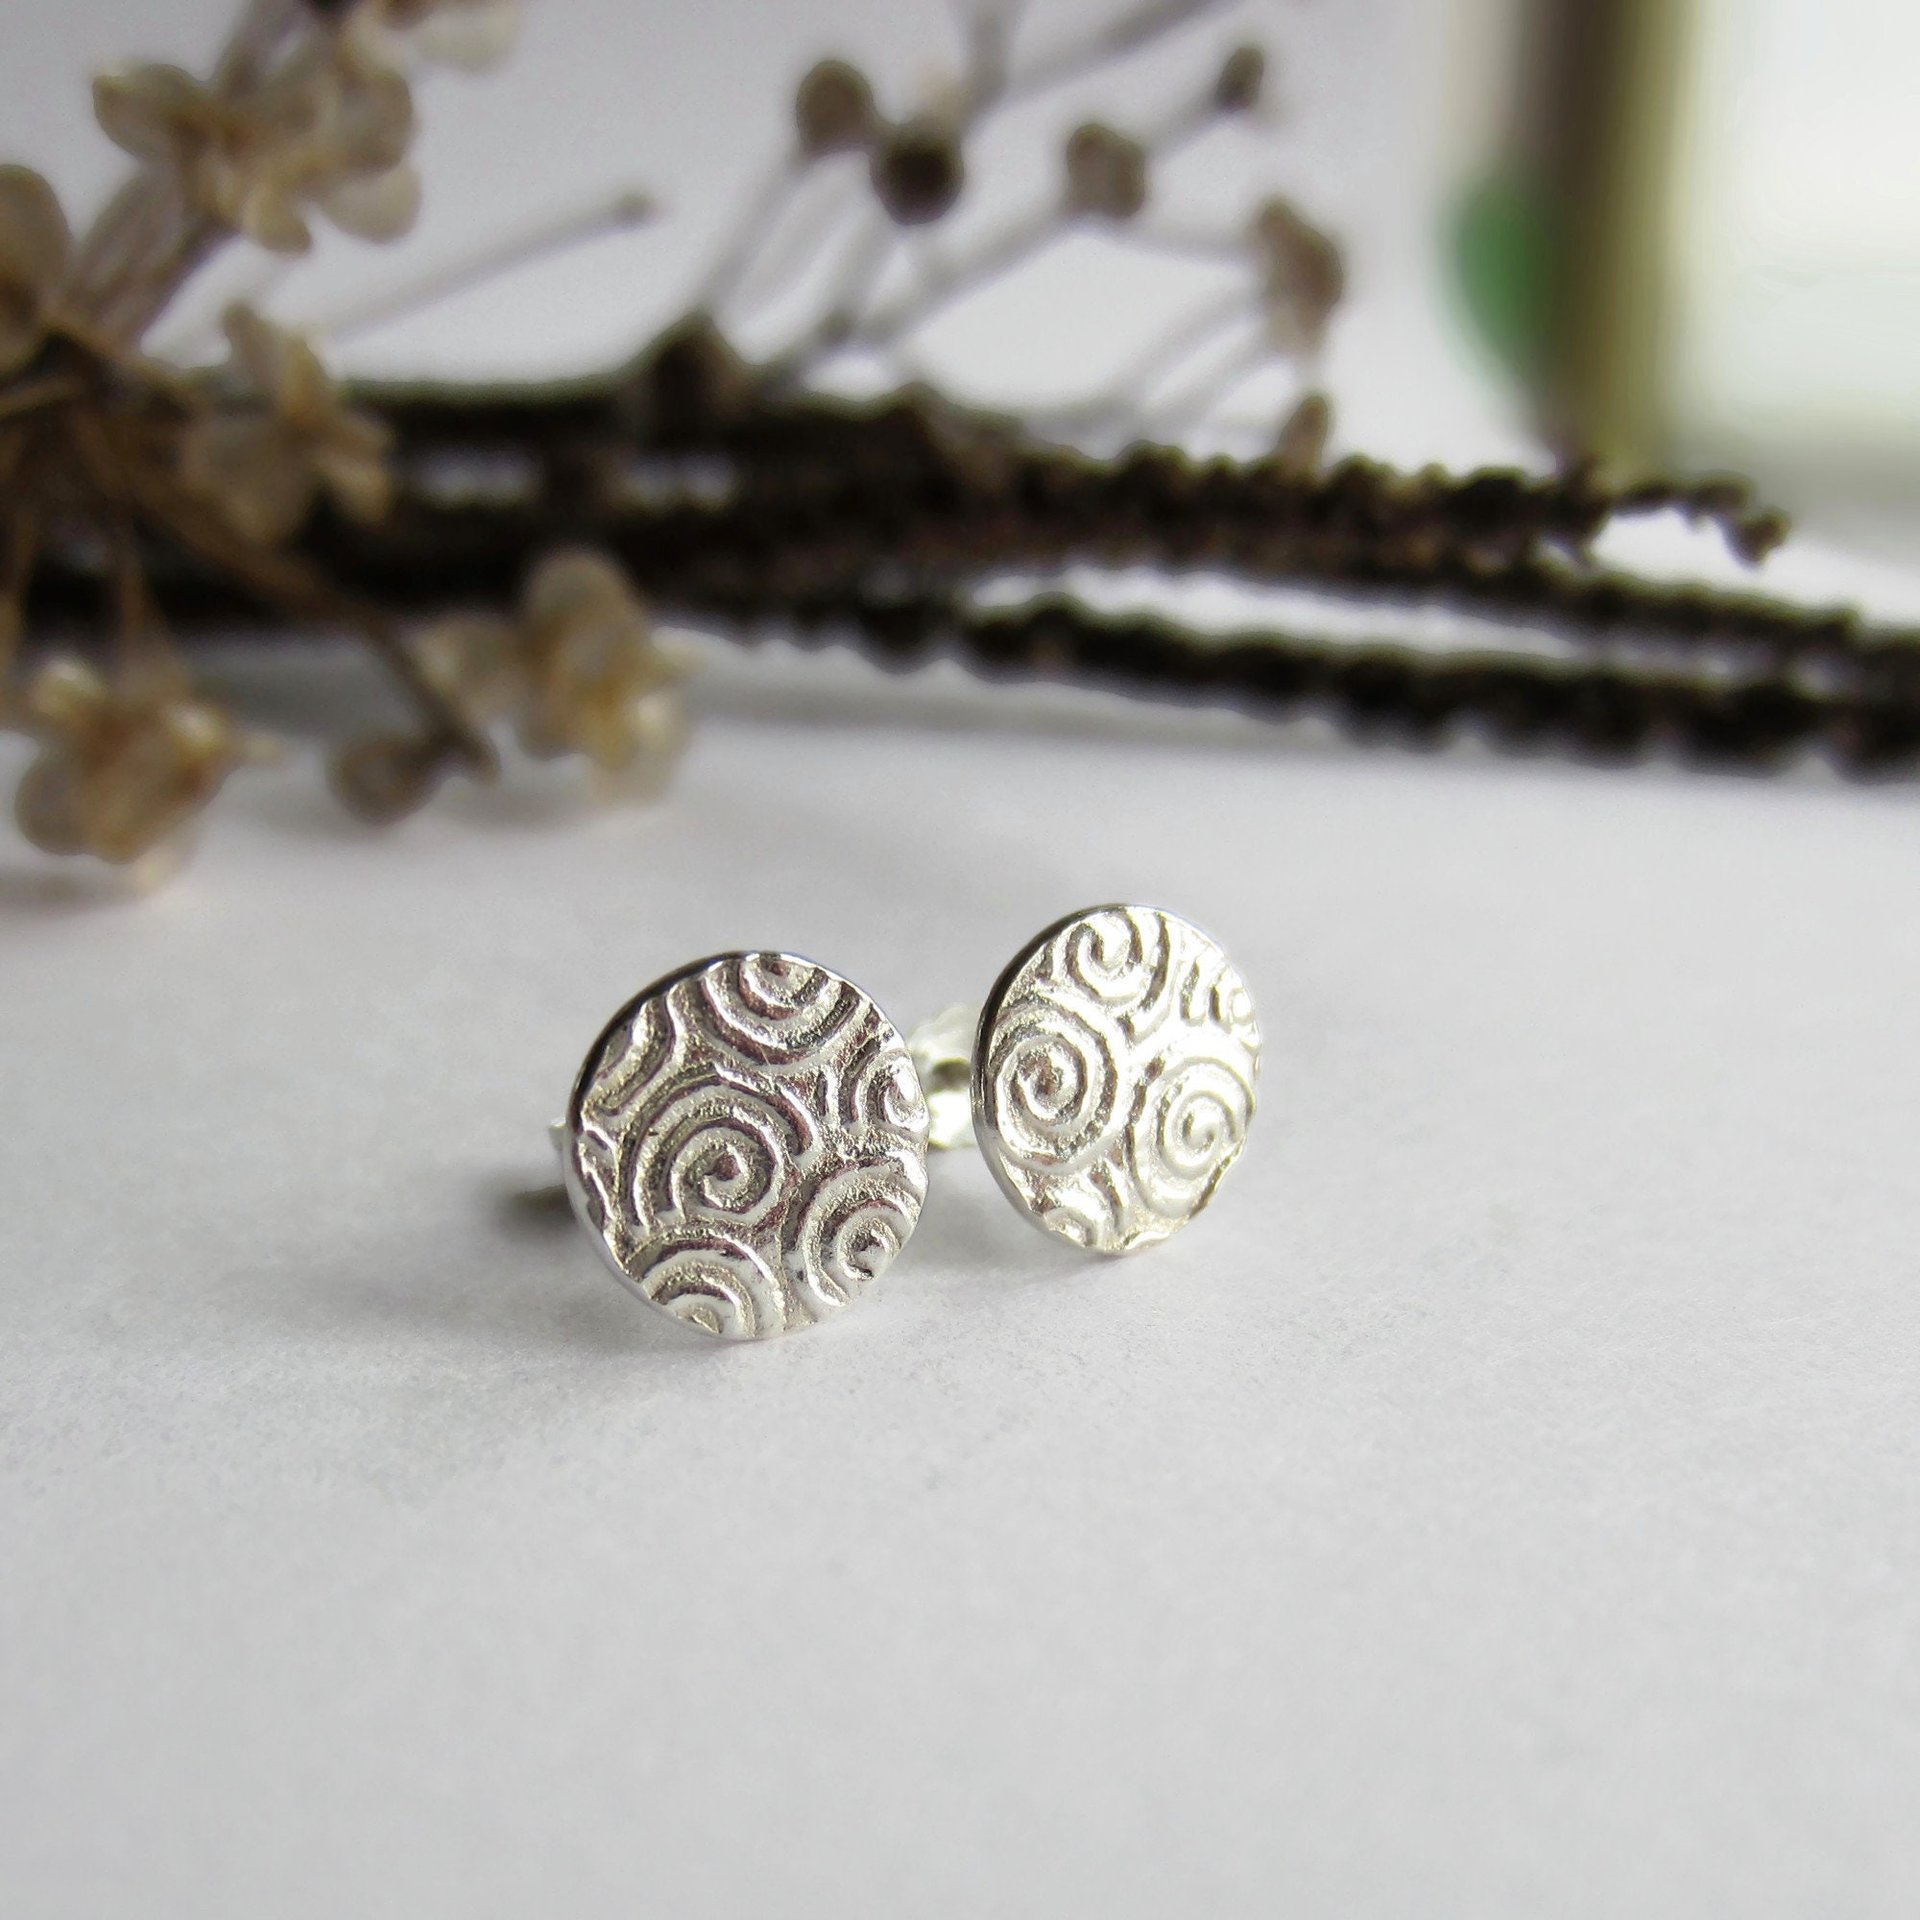 Fine Silver and Sterling Silver Spiral Pattern Textured Stud Earrings ~ Handmade by The Tiny Tree Frog Jewellery